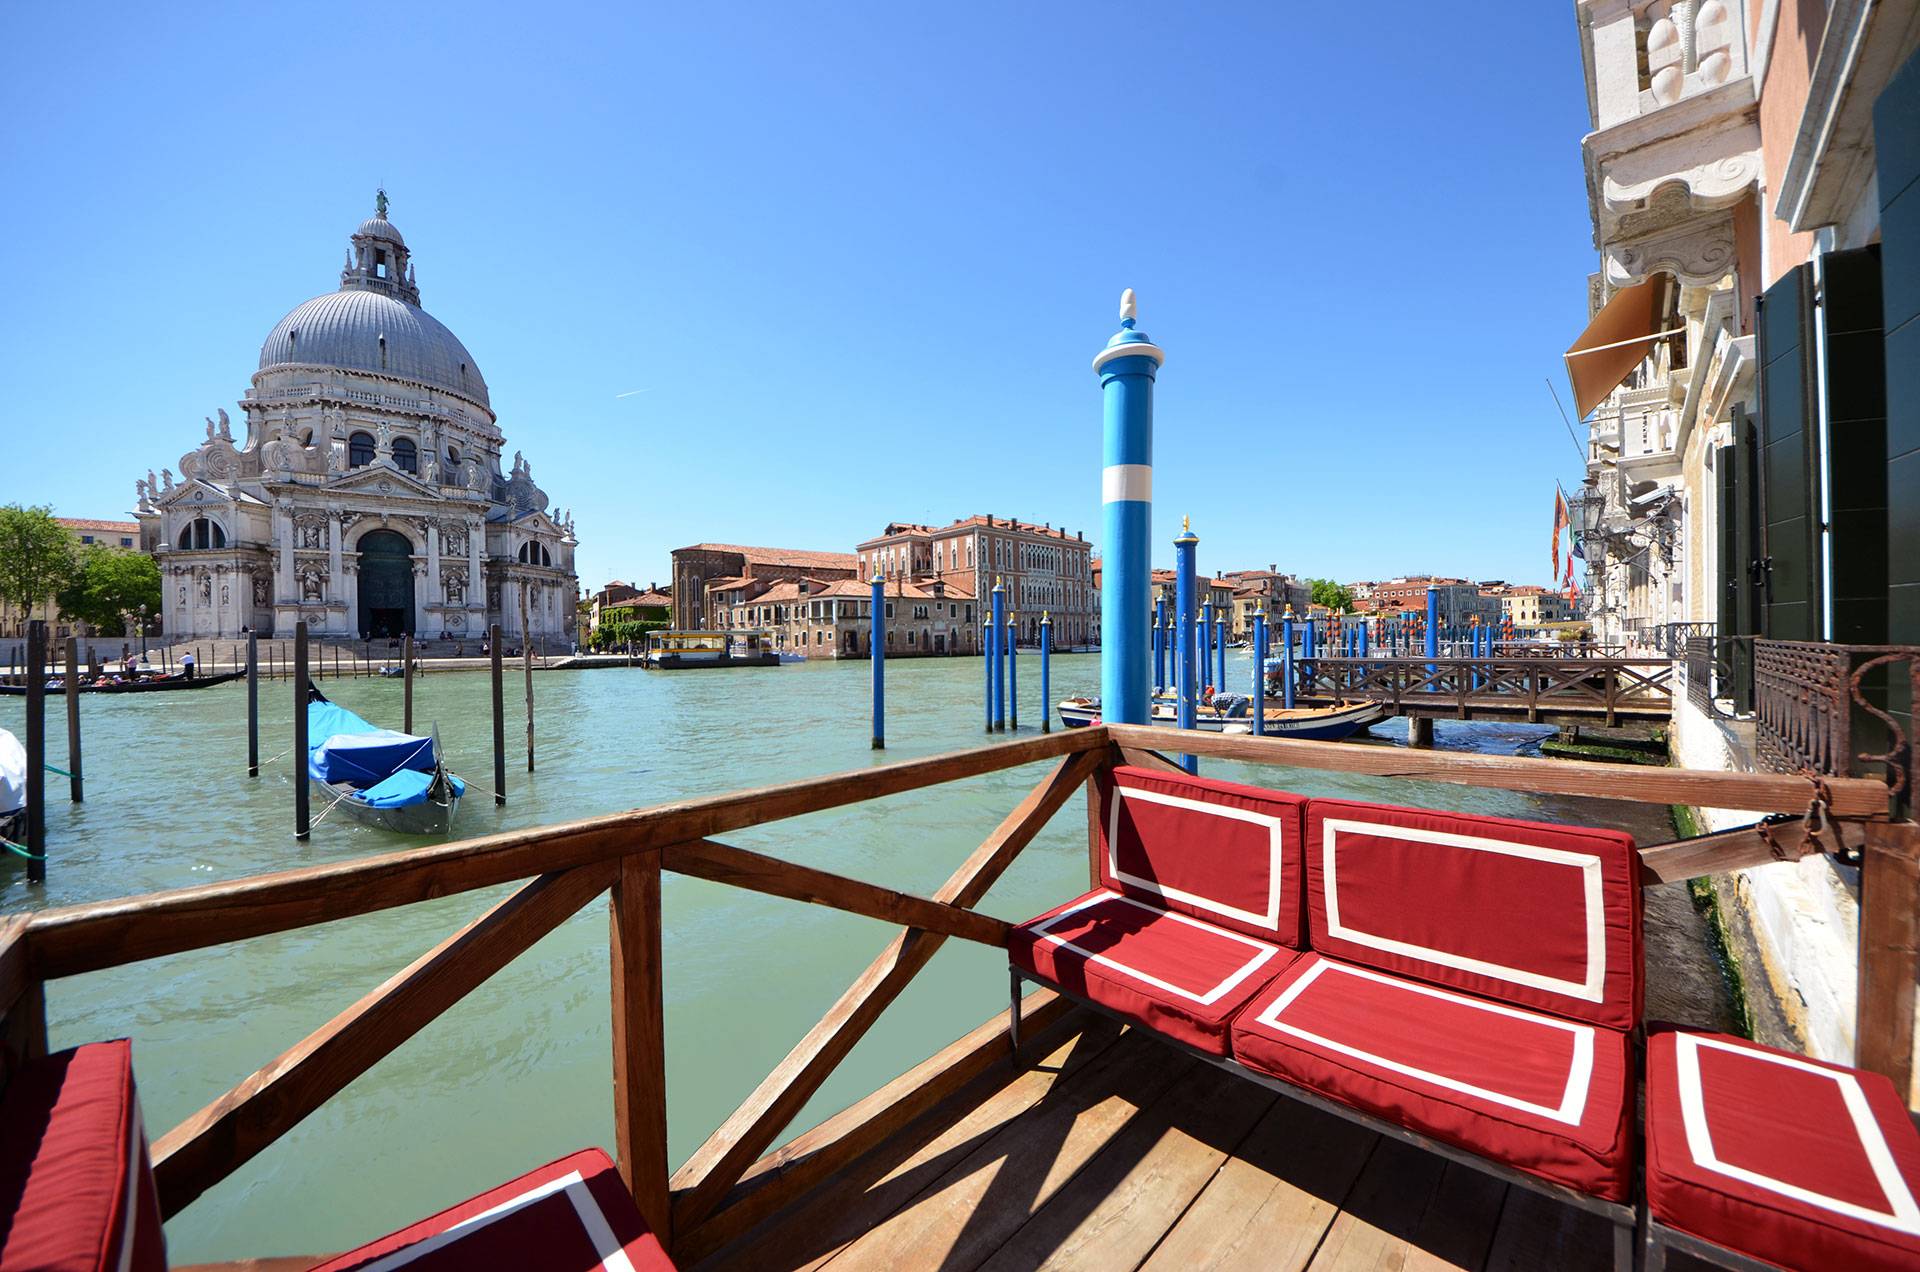 The Private Terrace on the Grand Canal is absolutely unique